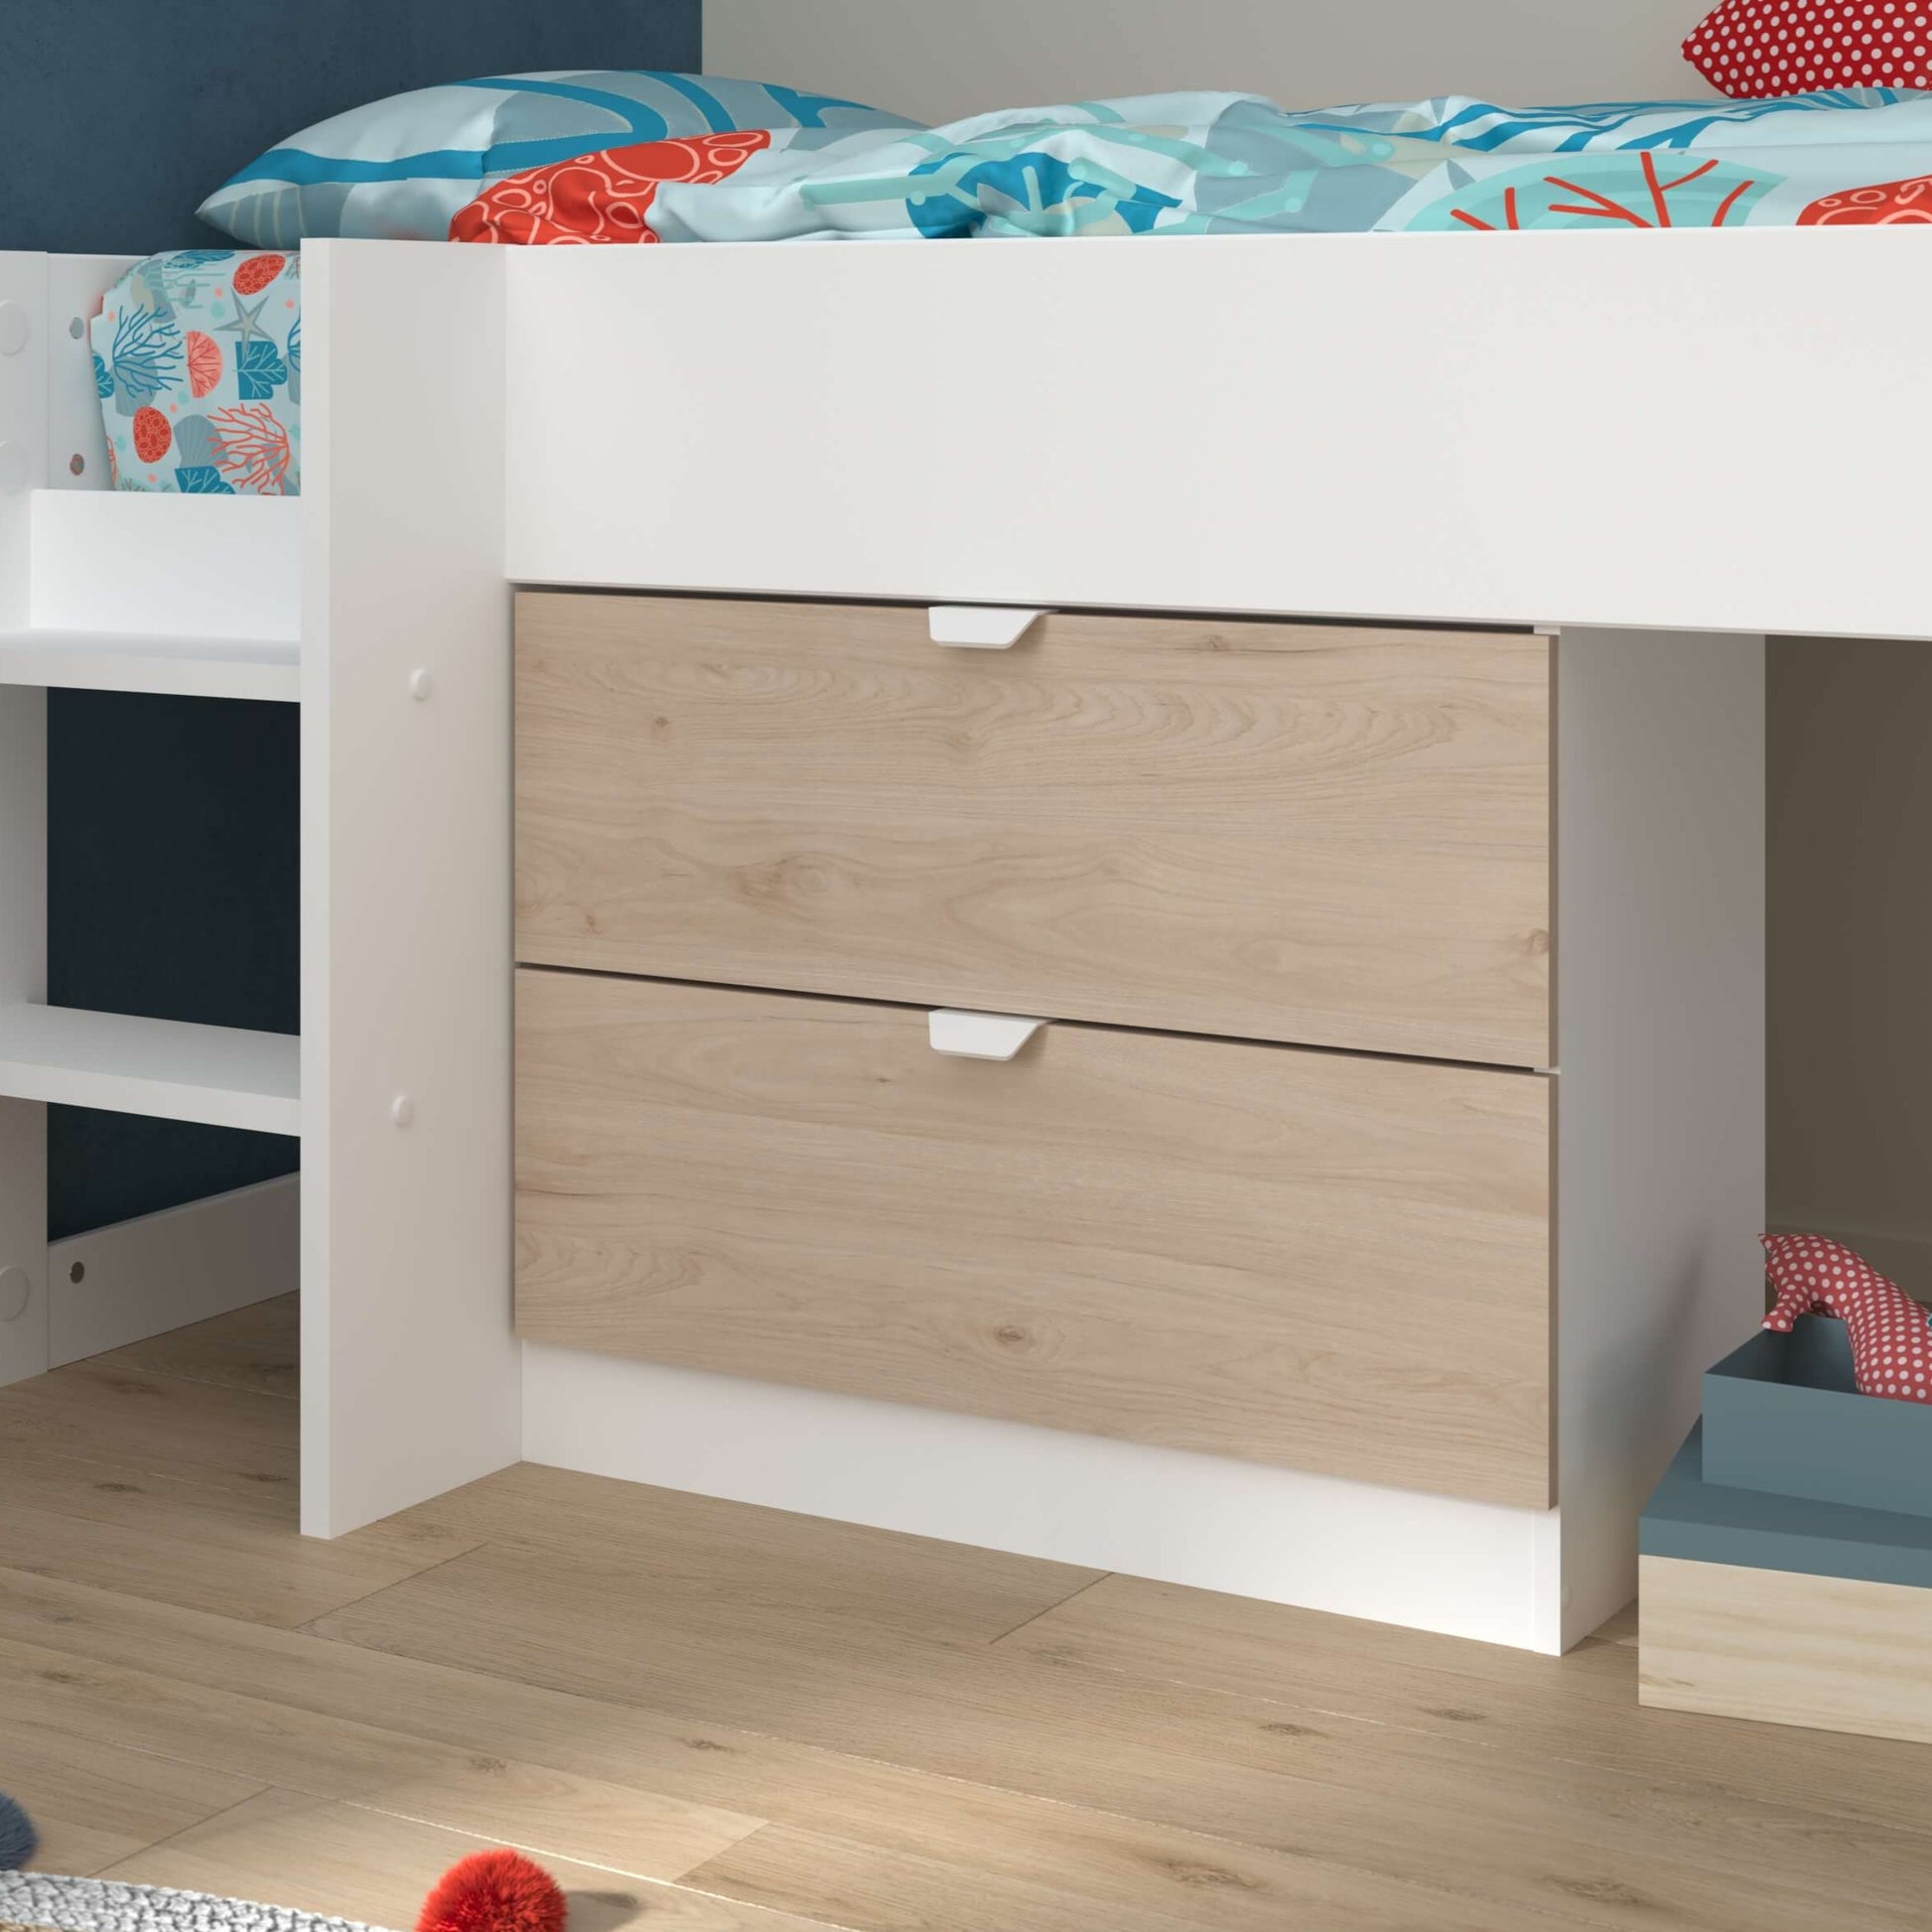 Tobo Mid Sleeper Bed with Slide & Drawers In Boys Room With Drawers